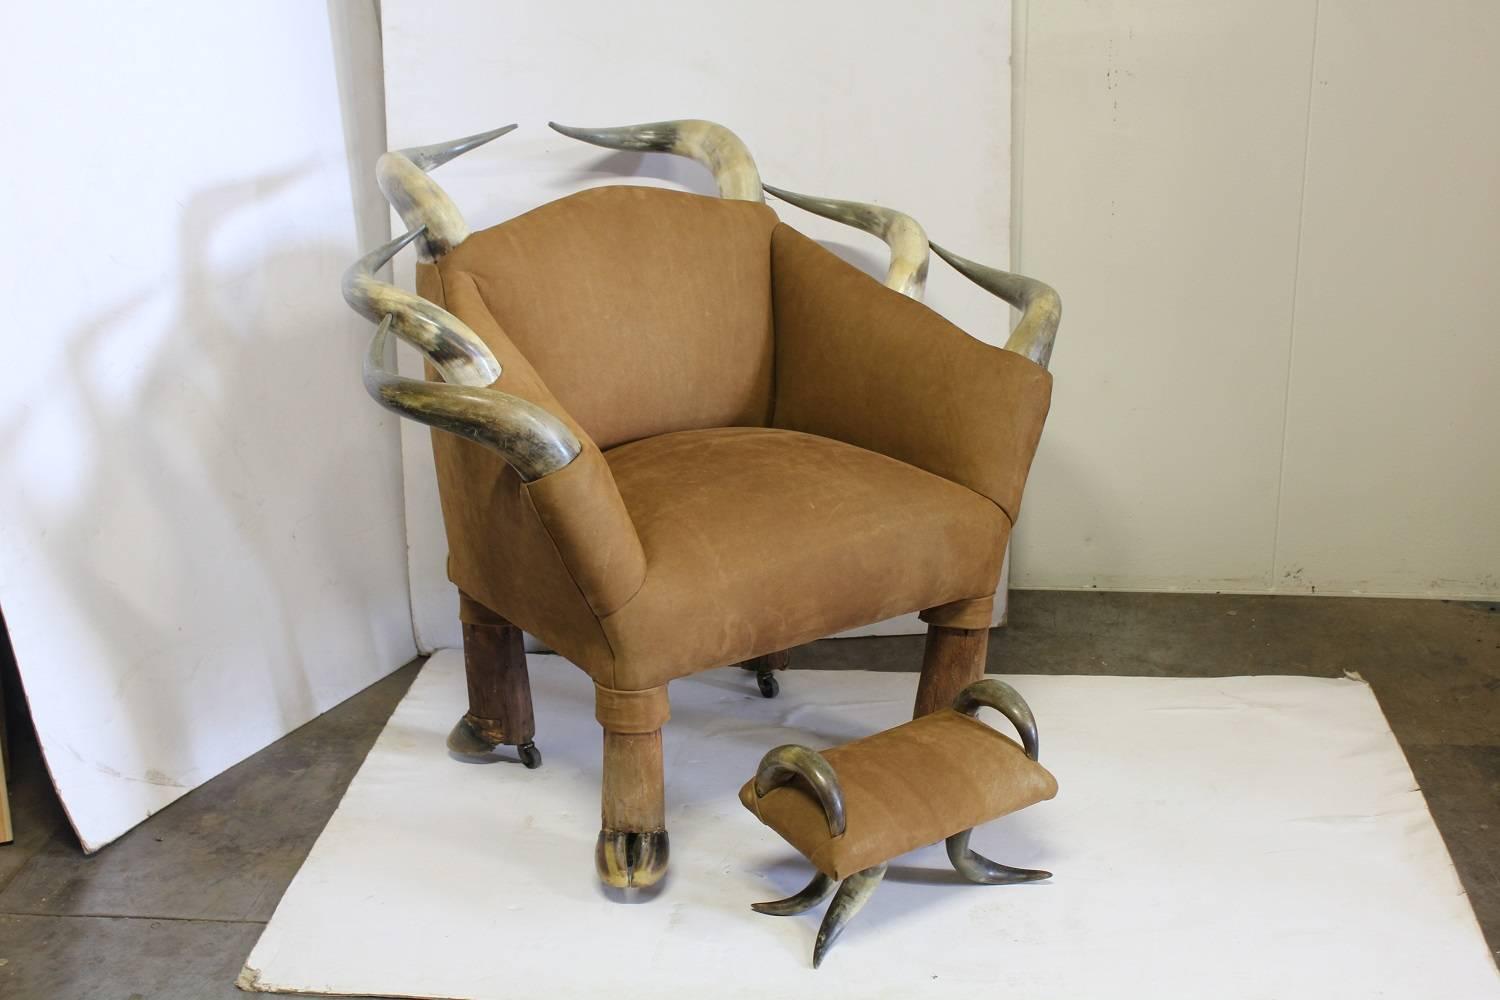 Spectacular Antique Horn and Suede Lounge Chair and Ottoman. New suede upholstery. Stool: H 10, W 14.25", D 8.25"